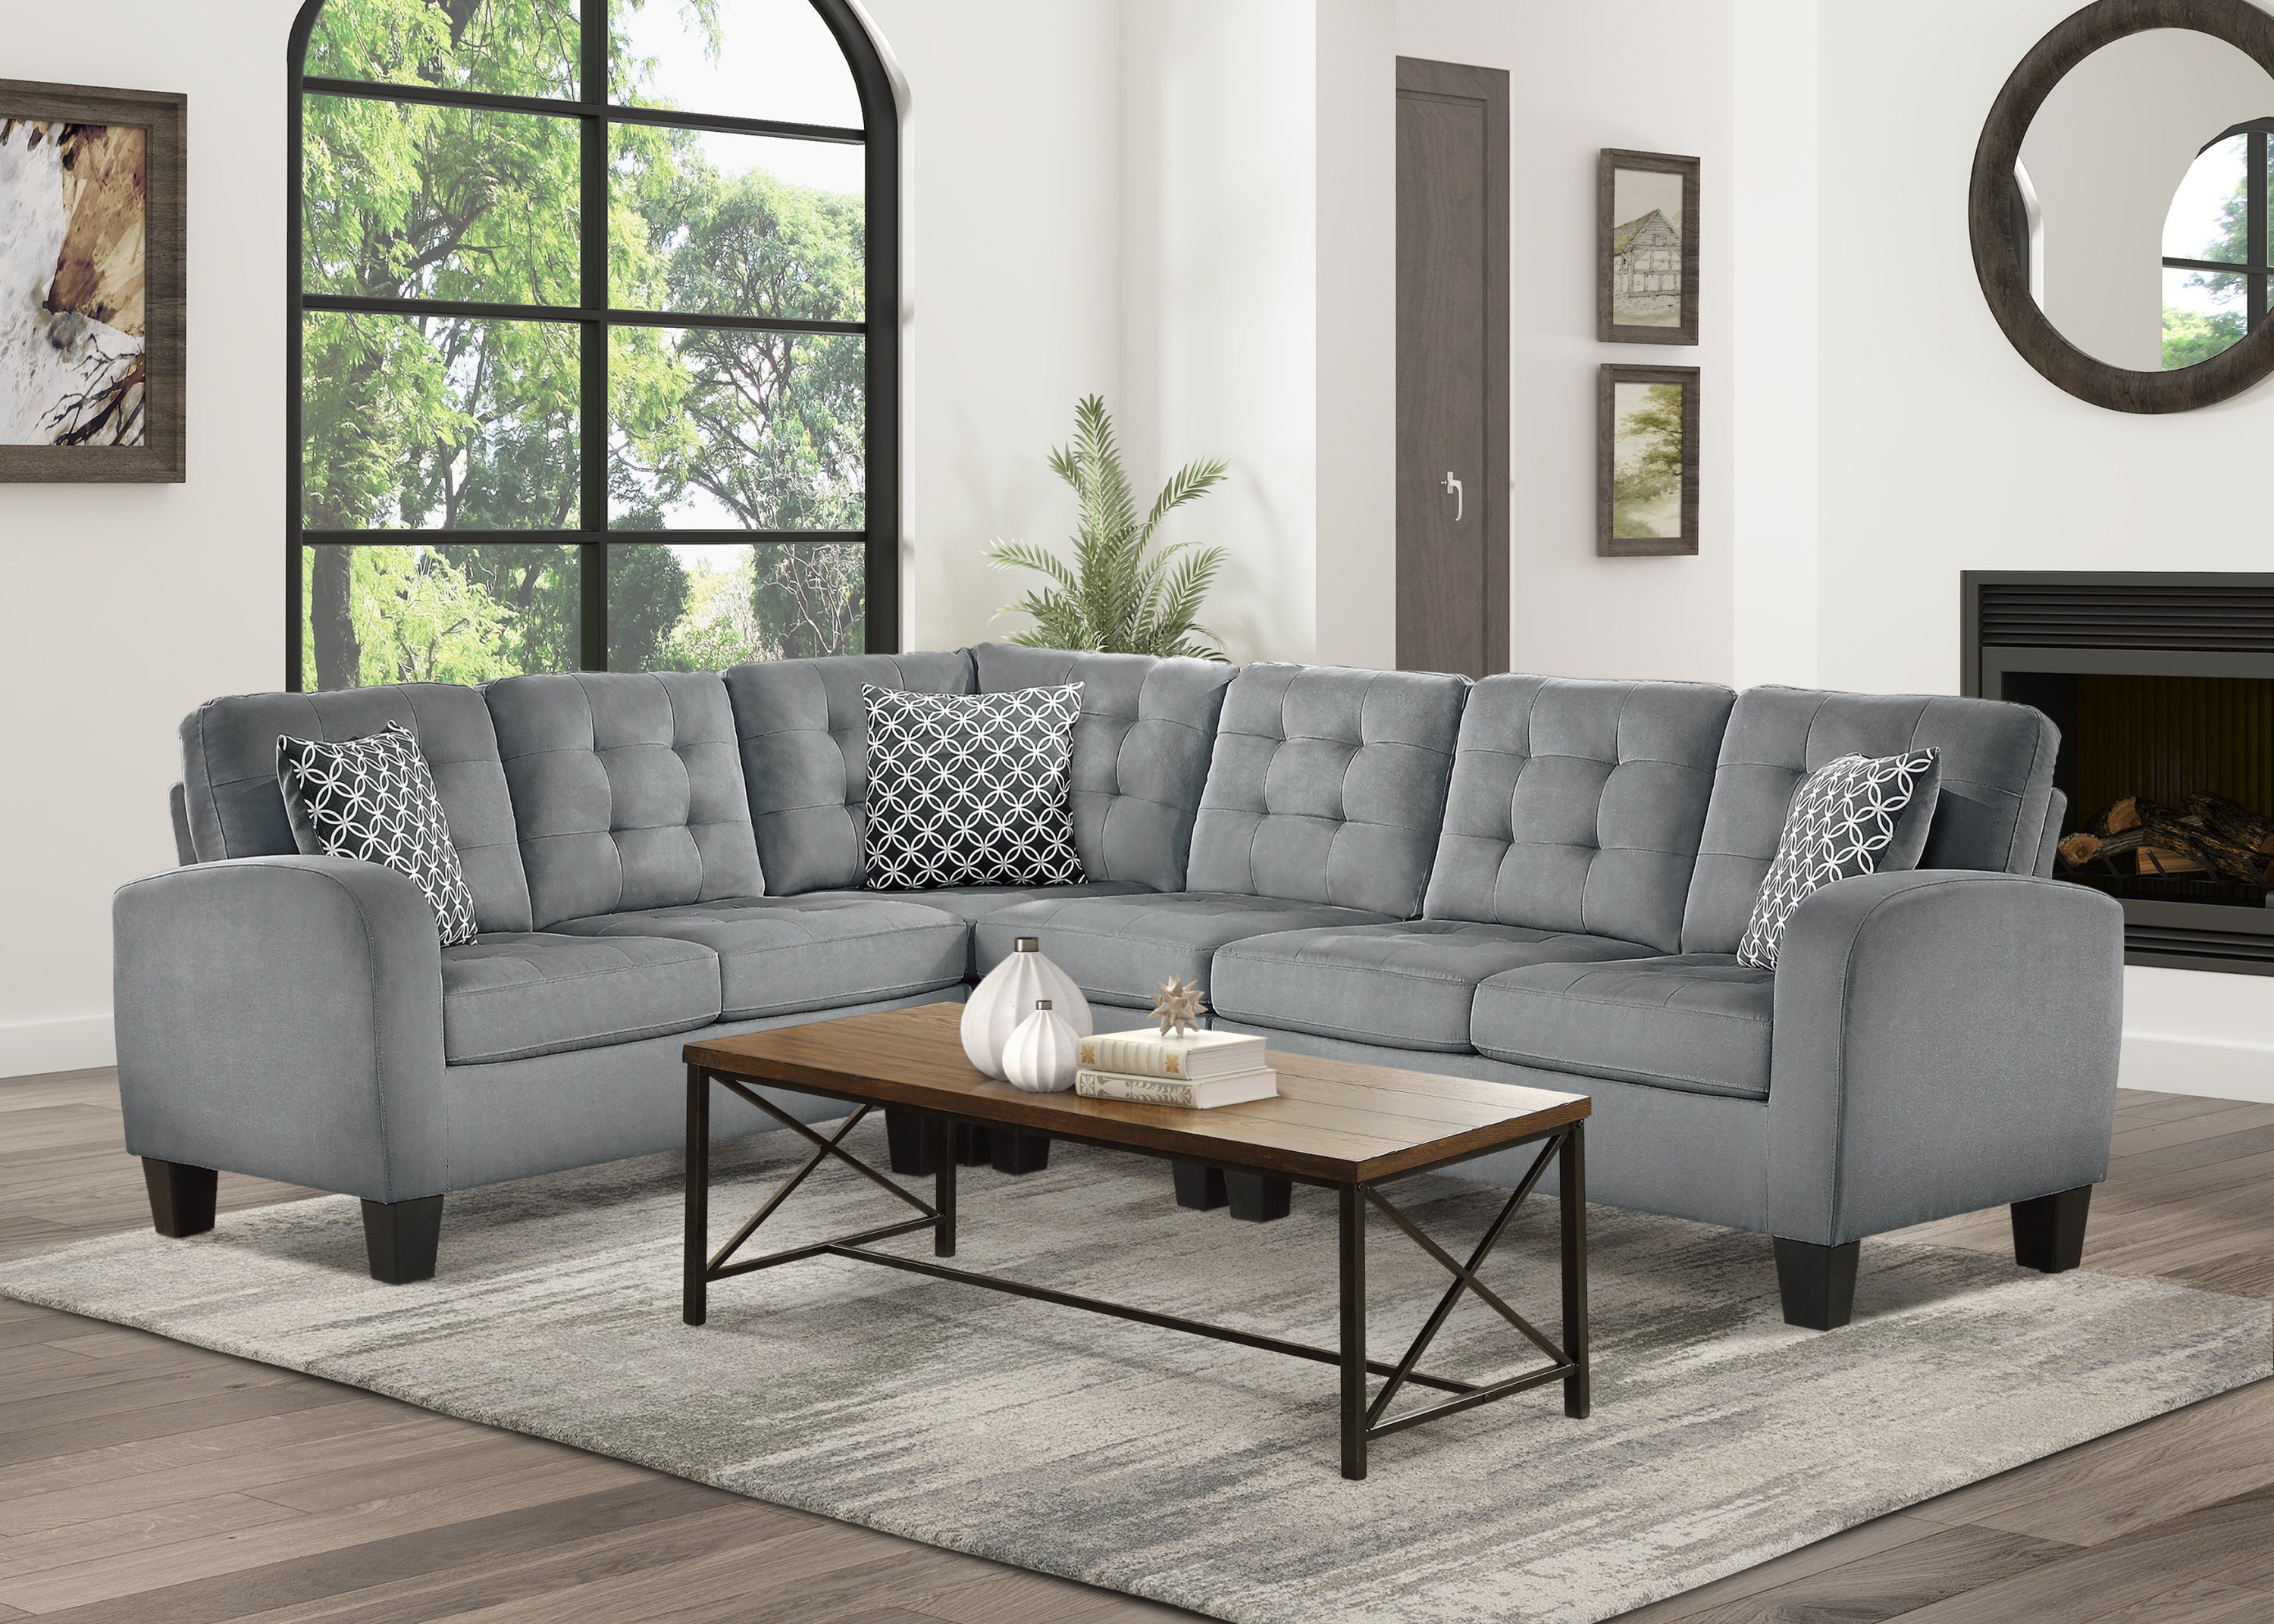 Gray Reversible 4-Piece Sectional Sofa